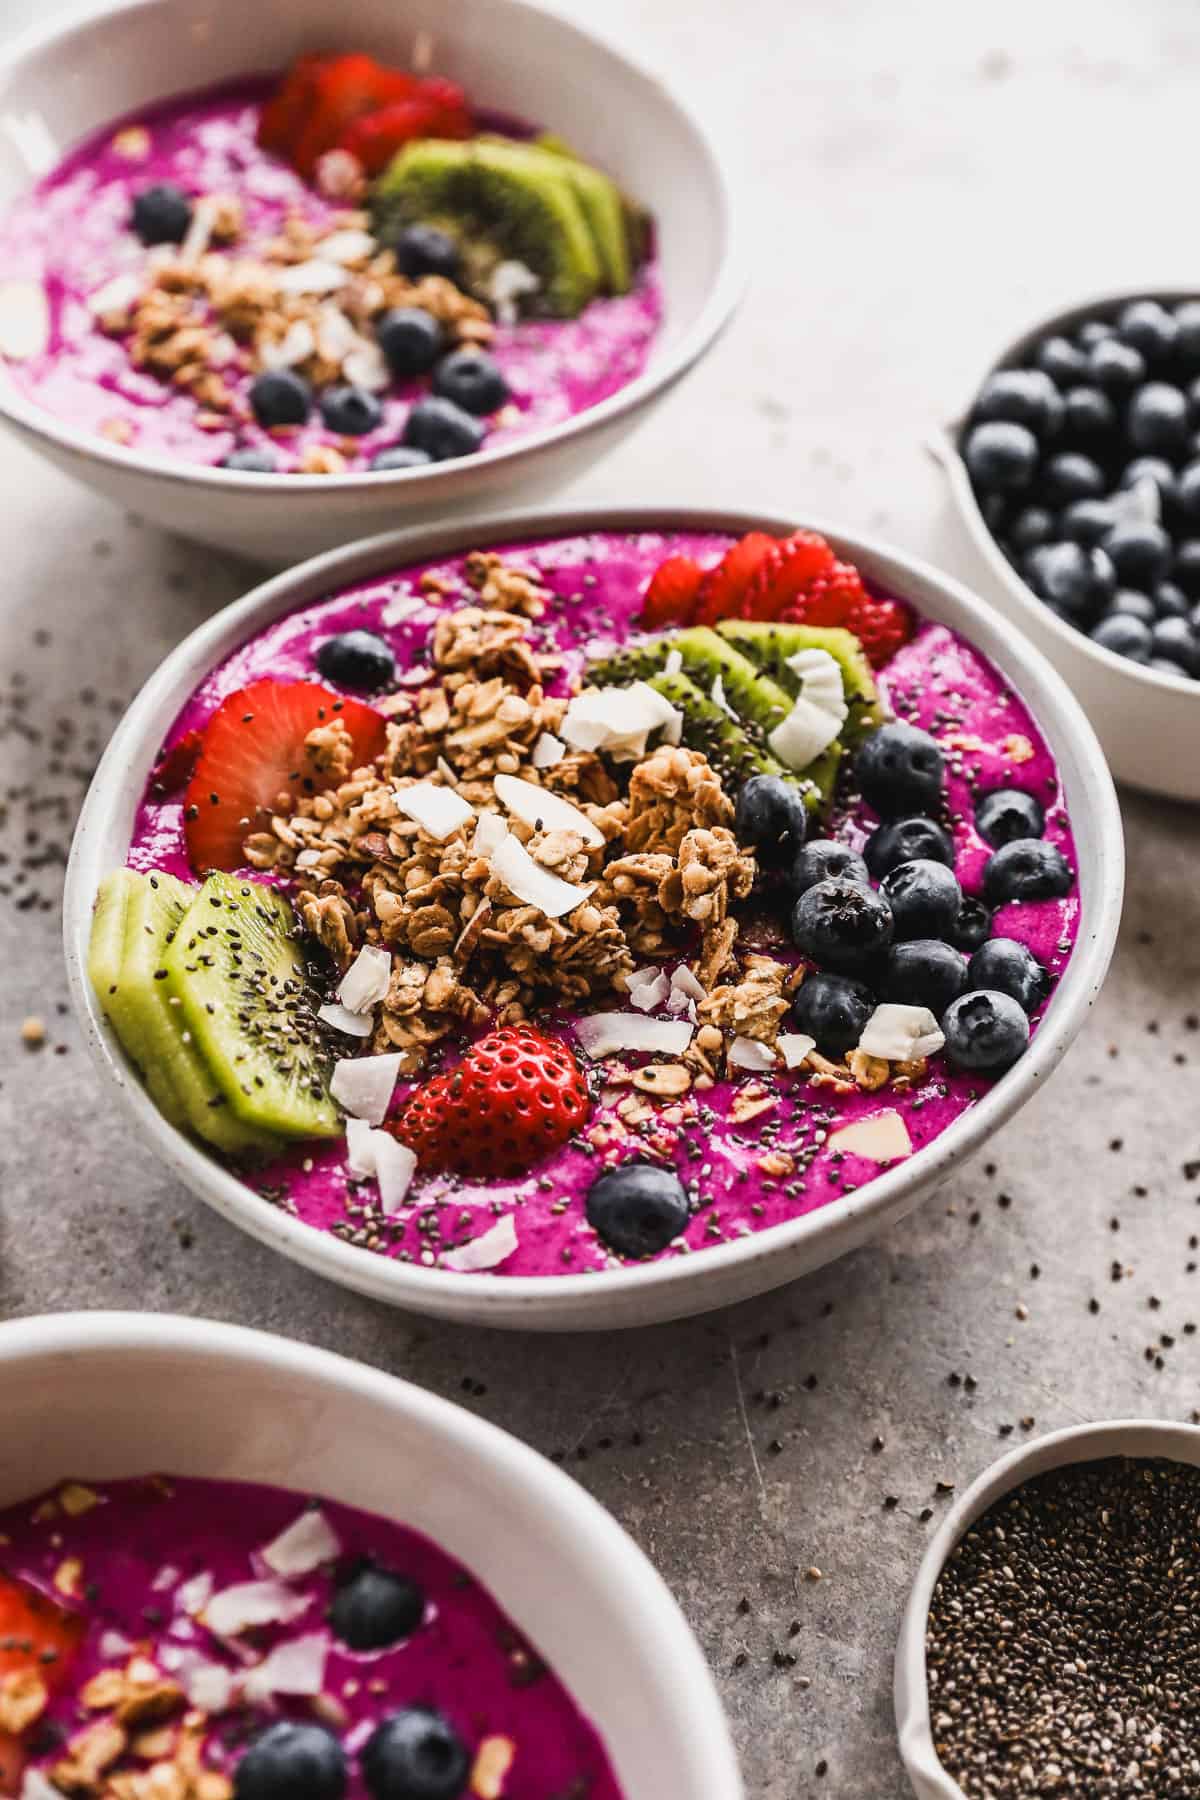 A pitaya smoothie bowl topped with homemade granola, sliced kiwi, strawberries, chia seeds, blueberries, and coconut flakes, ready to enjoy.